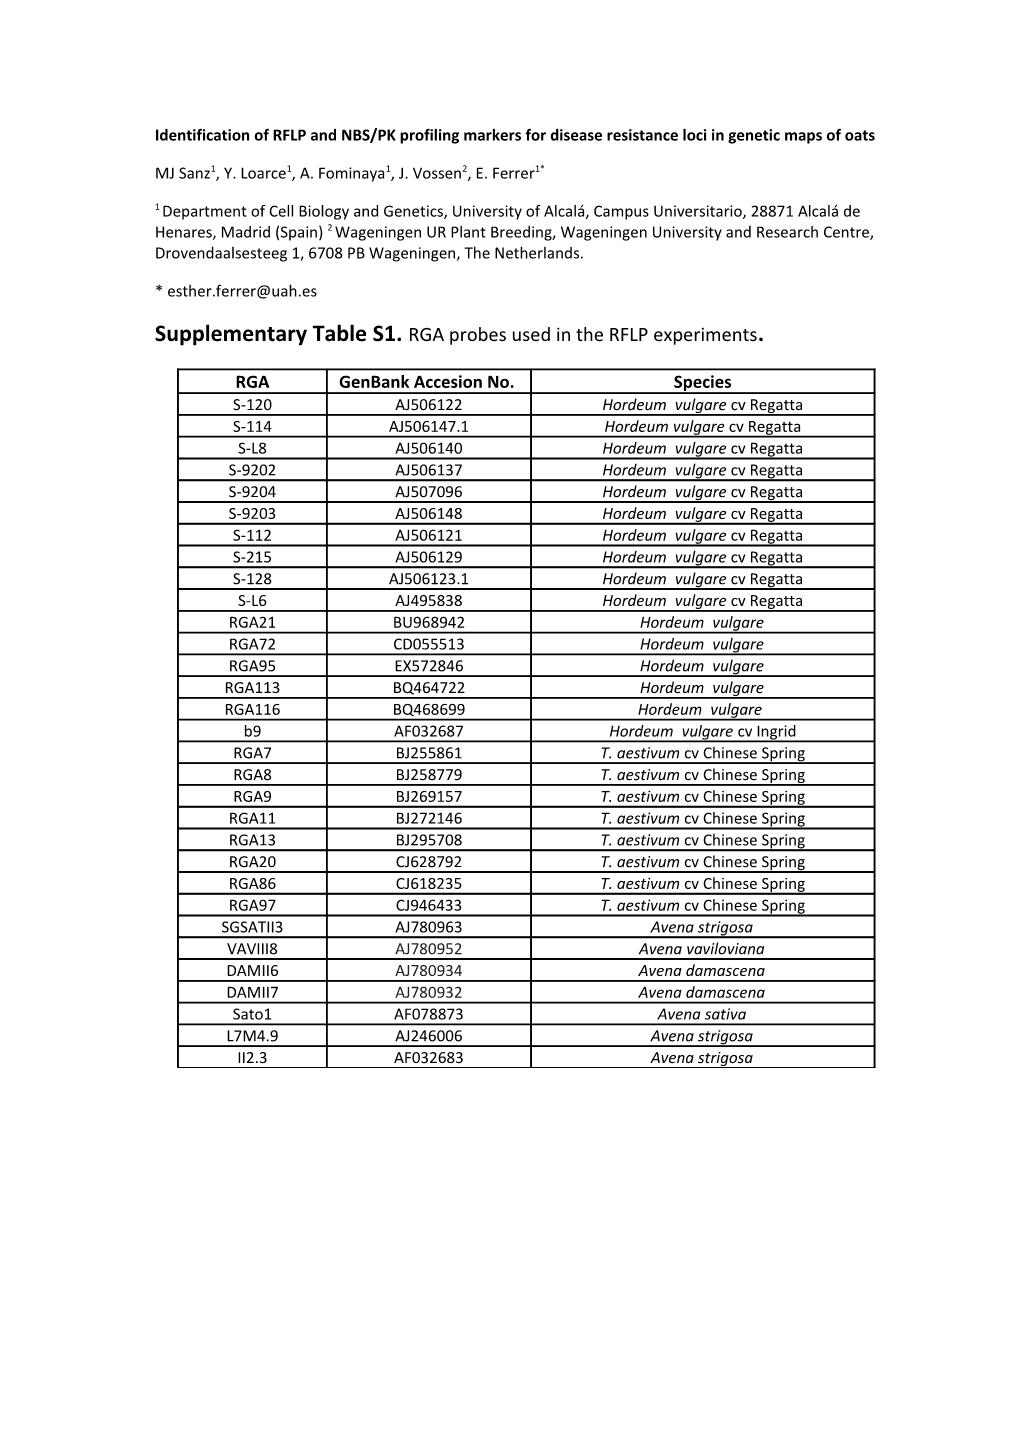 Supplementary Table S1. RGA Probes Used in the RFLP Experiments